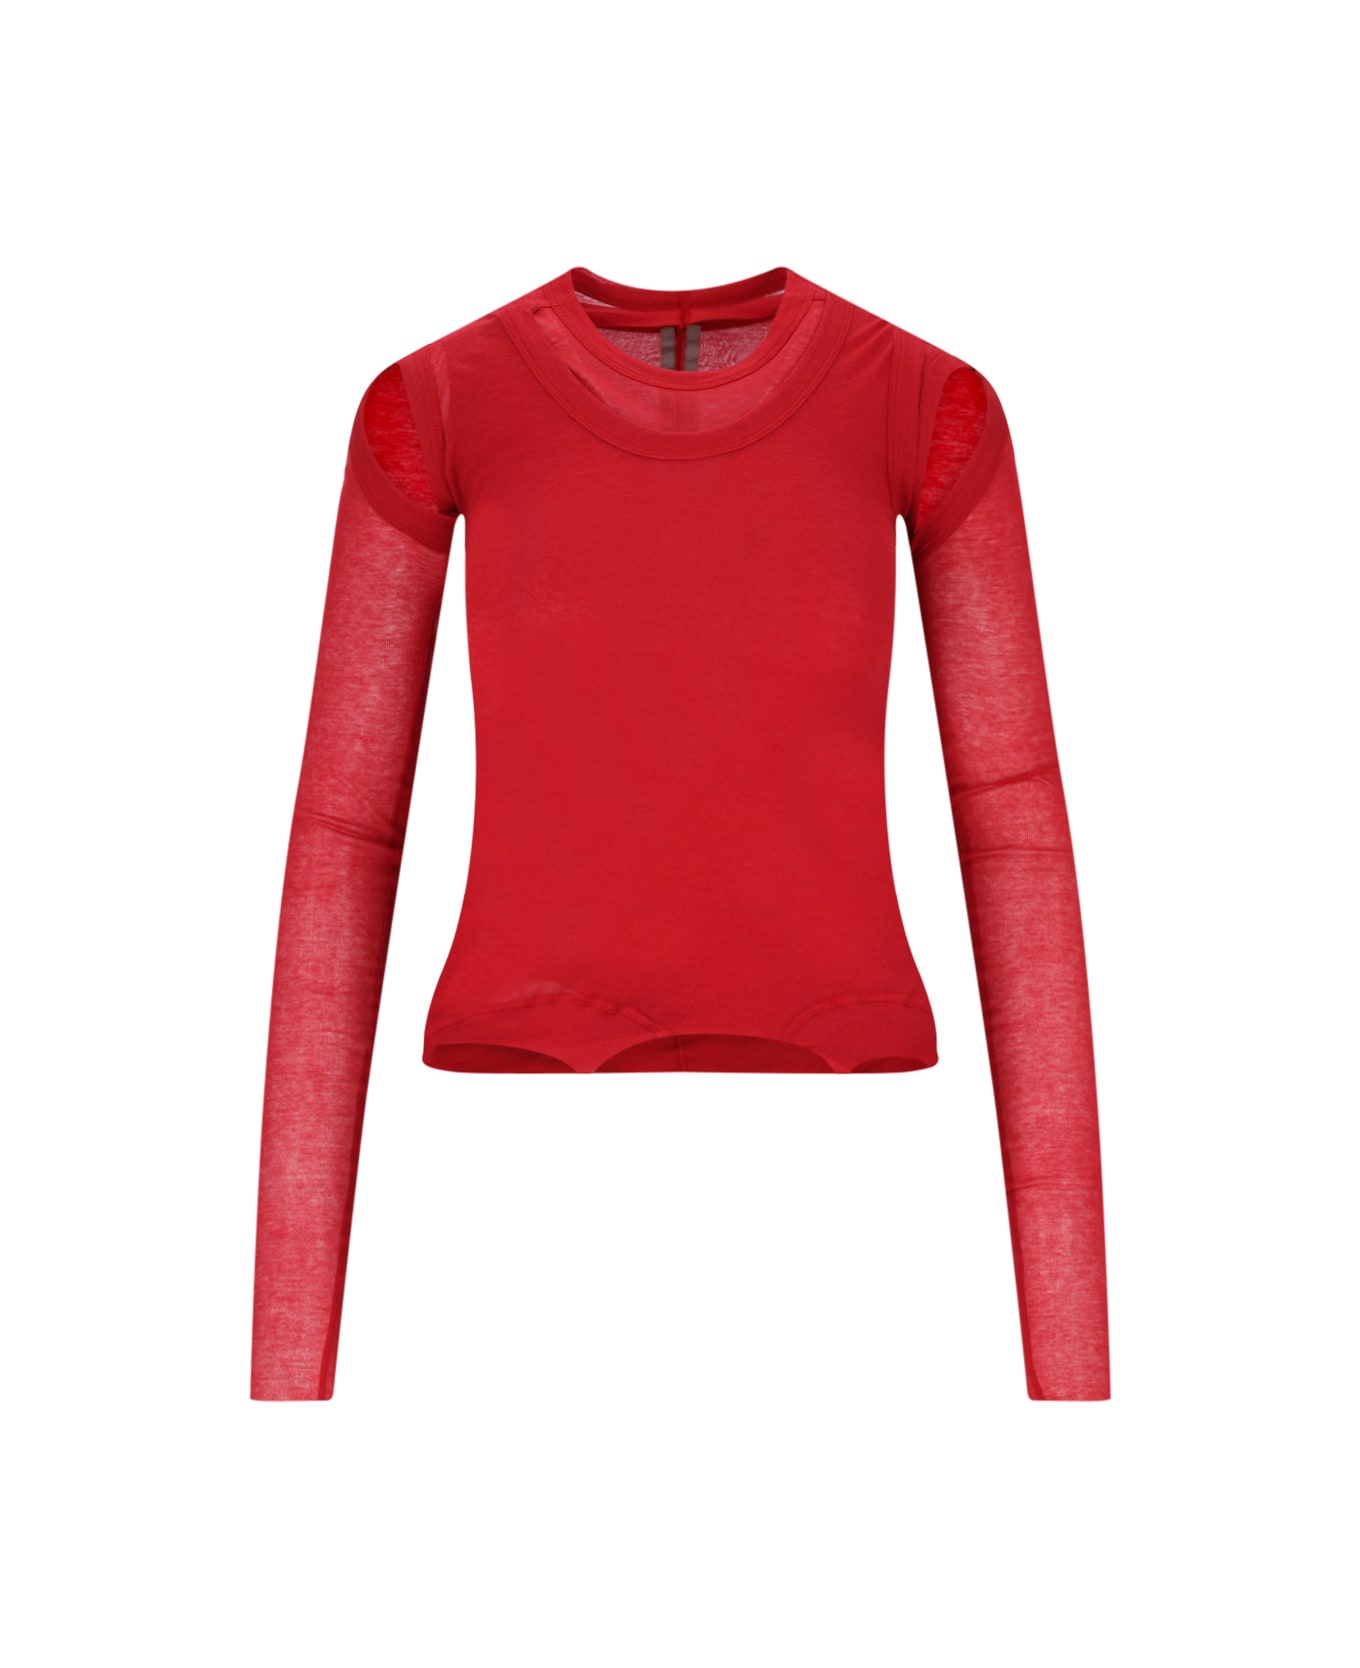 Rick Owens Top - Red